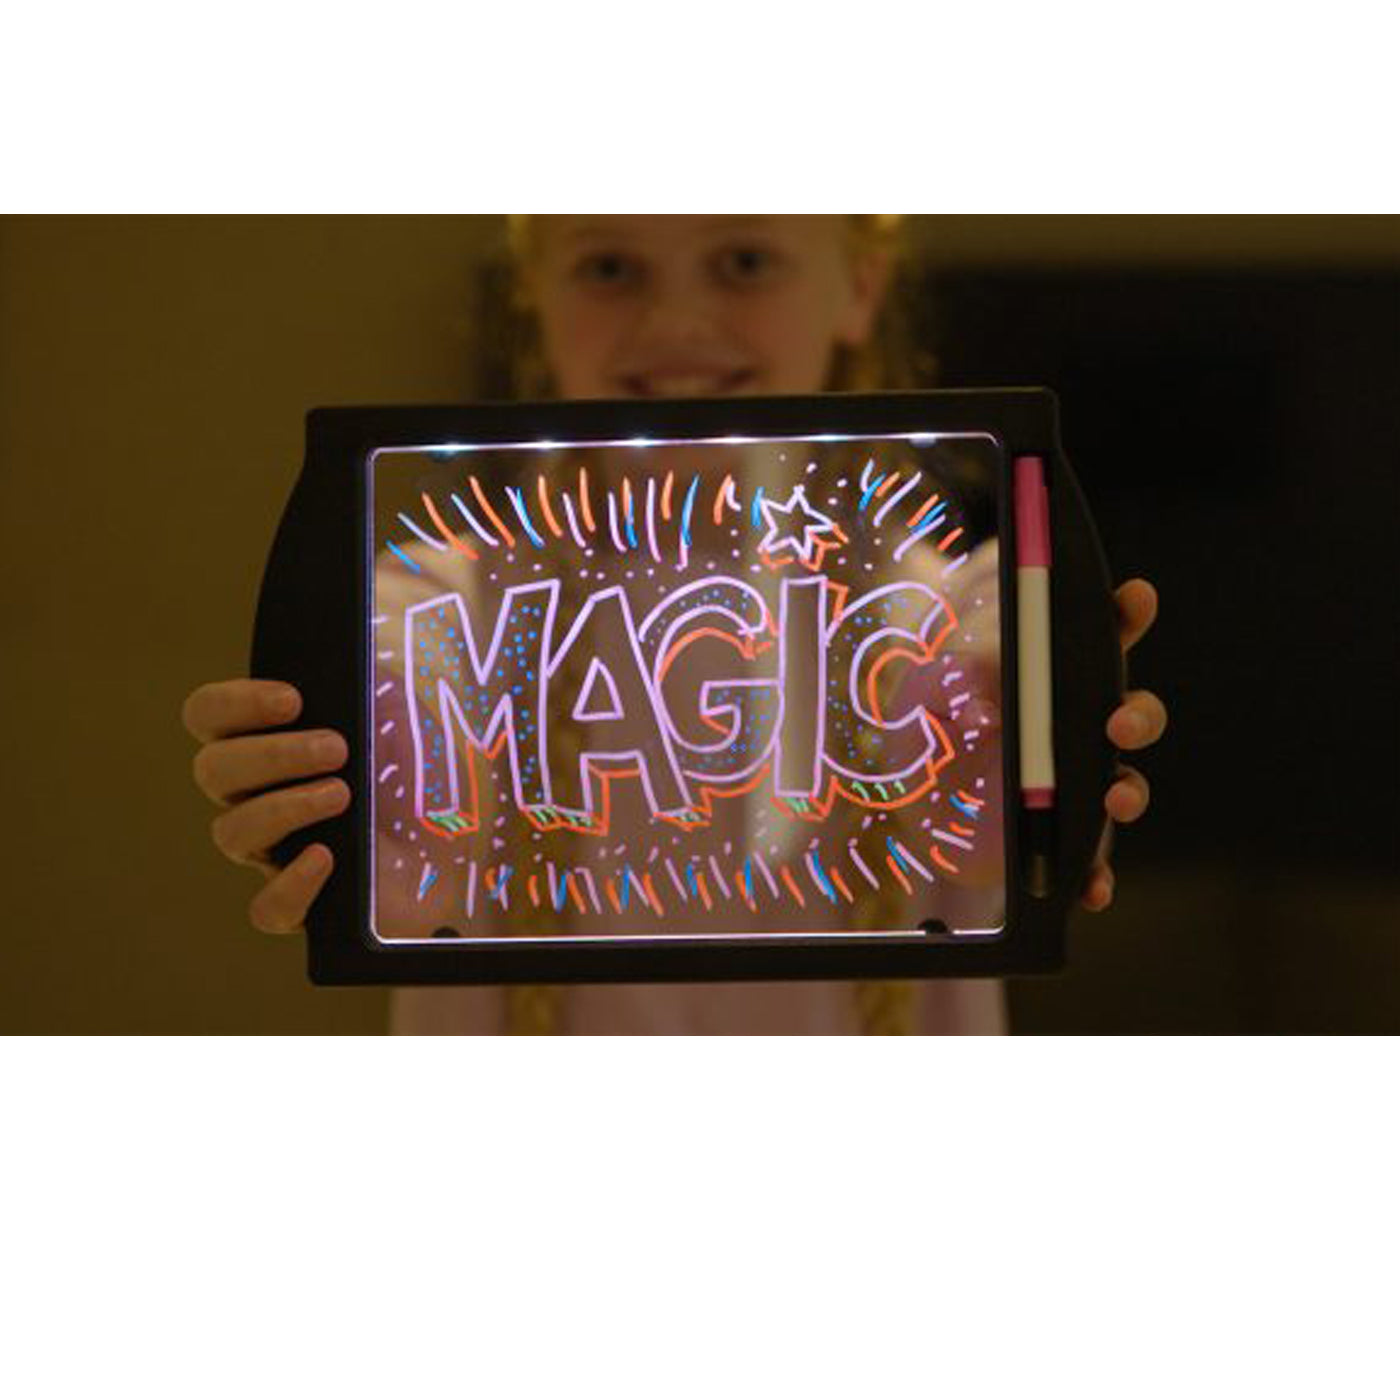 Light Drawing Board for Kids the Glow in Dark Neon Effect Draw Pad